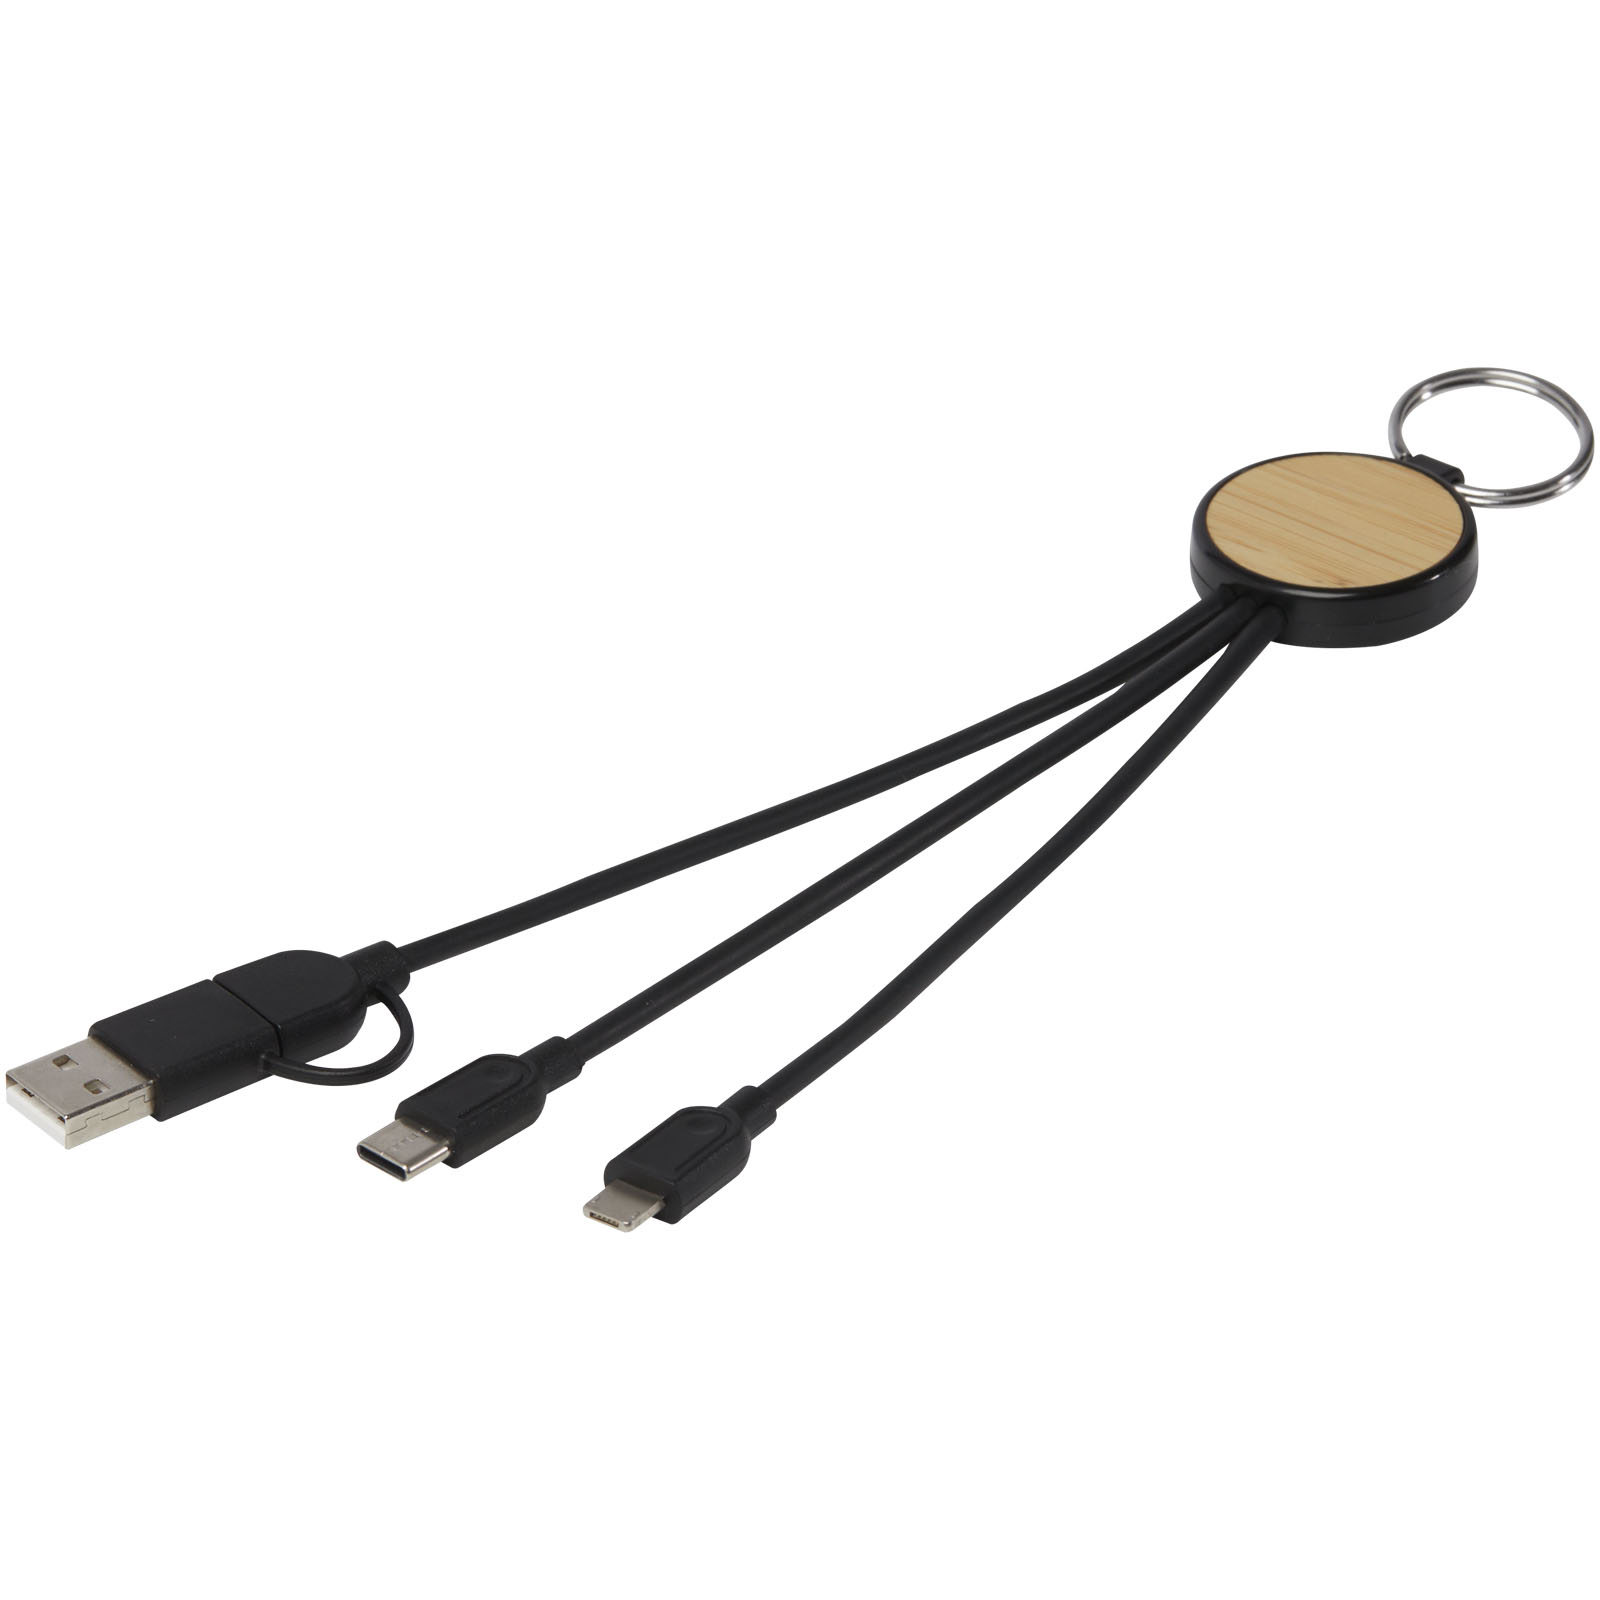 Eco-friendly 6-in-1 Charging Cable - Thorpe-le-Soken - Chesterfield